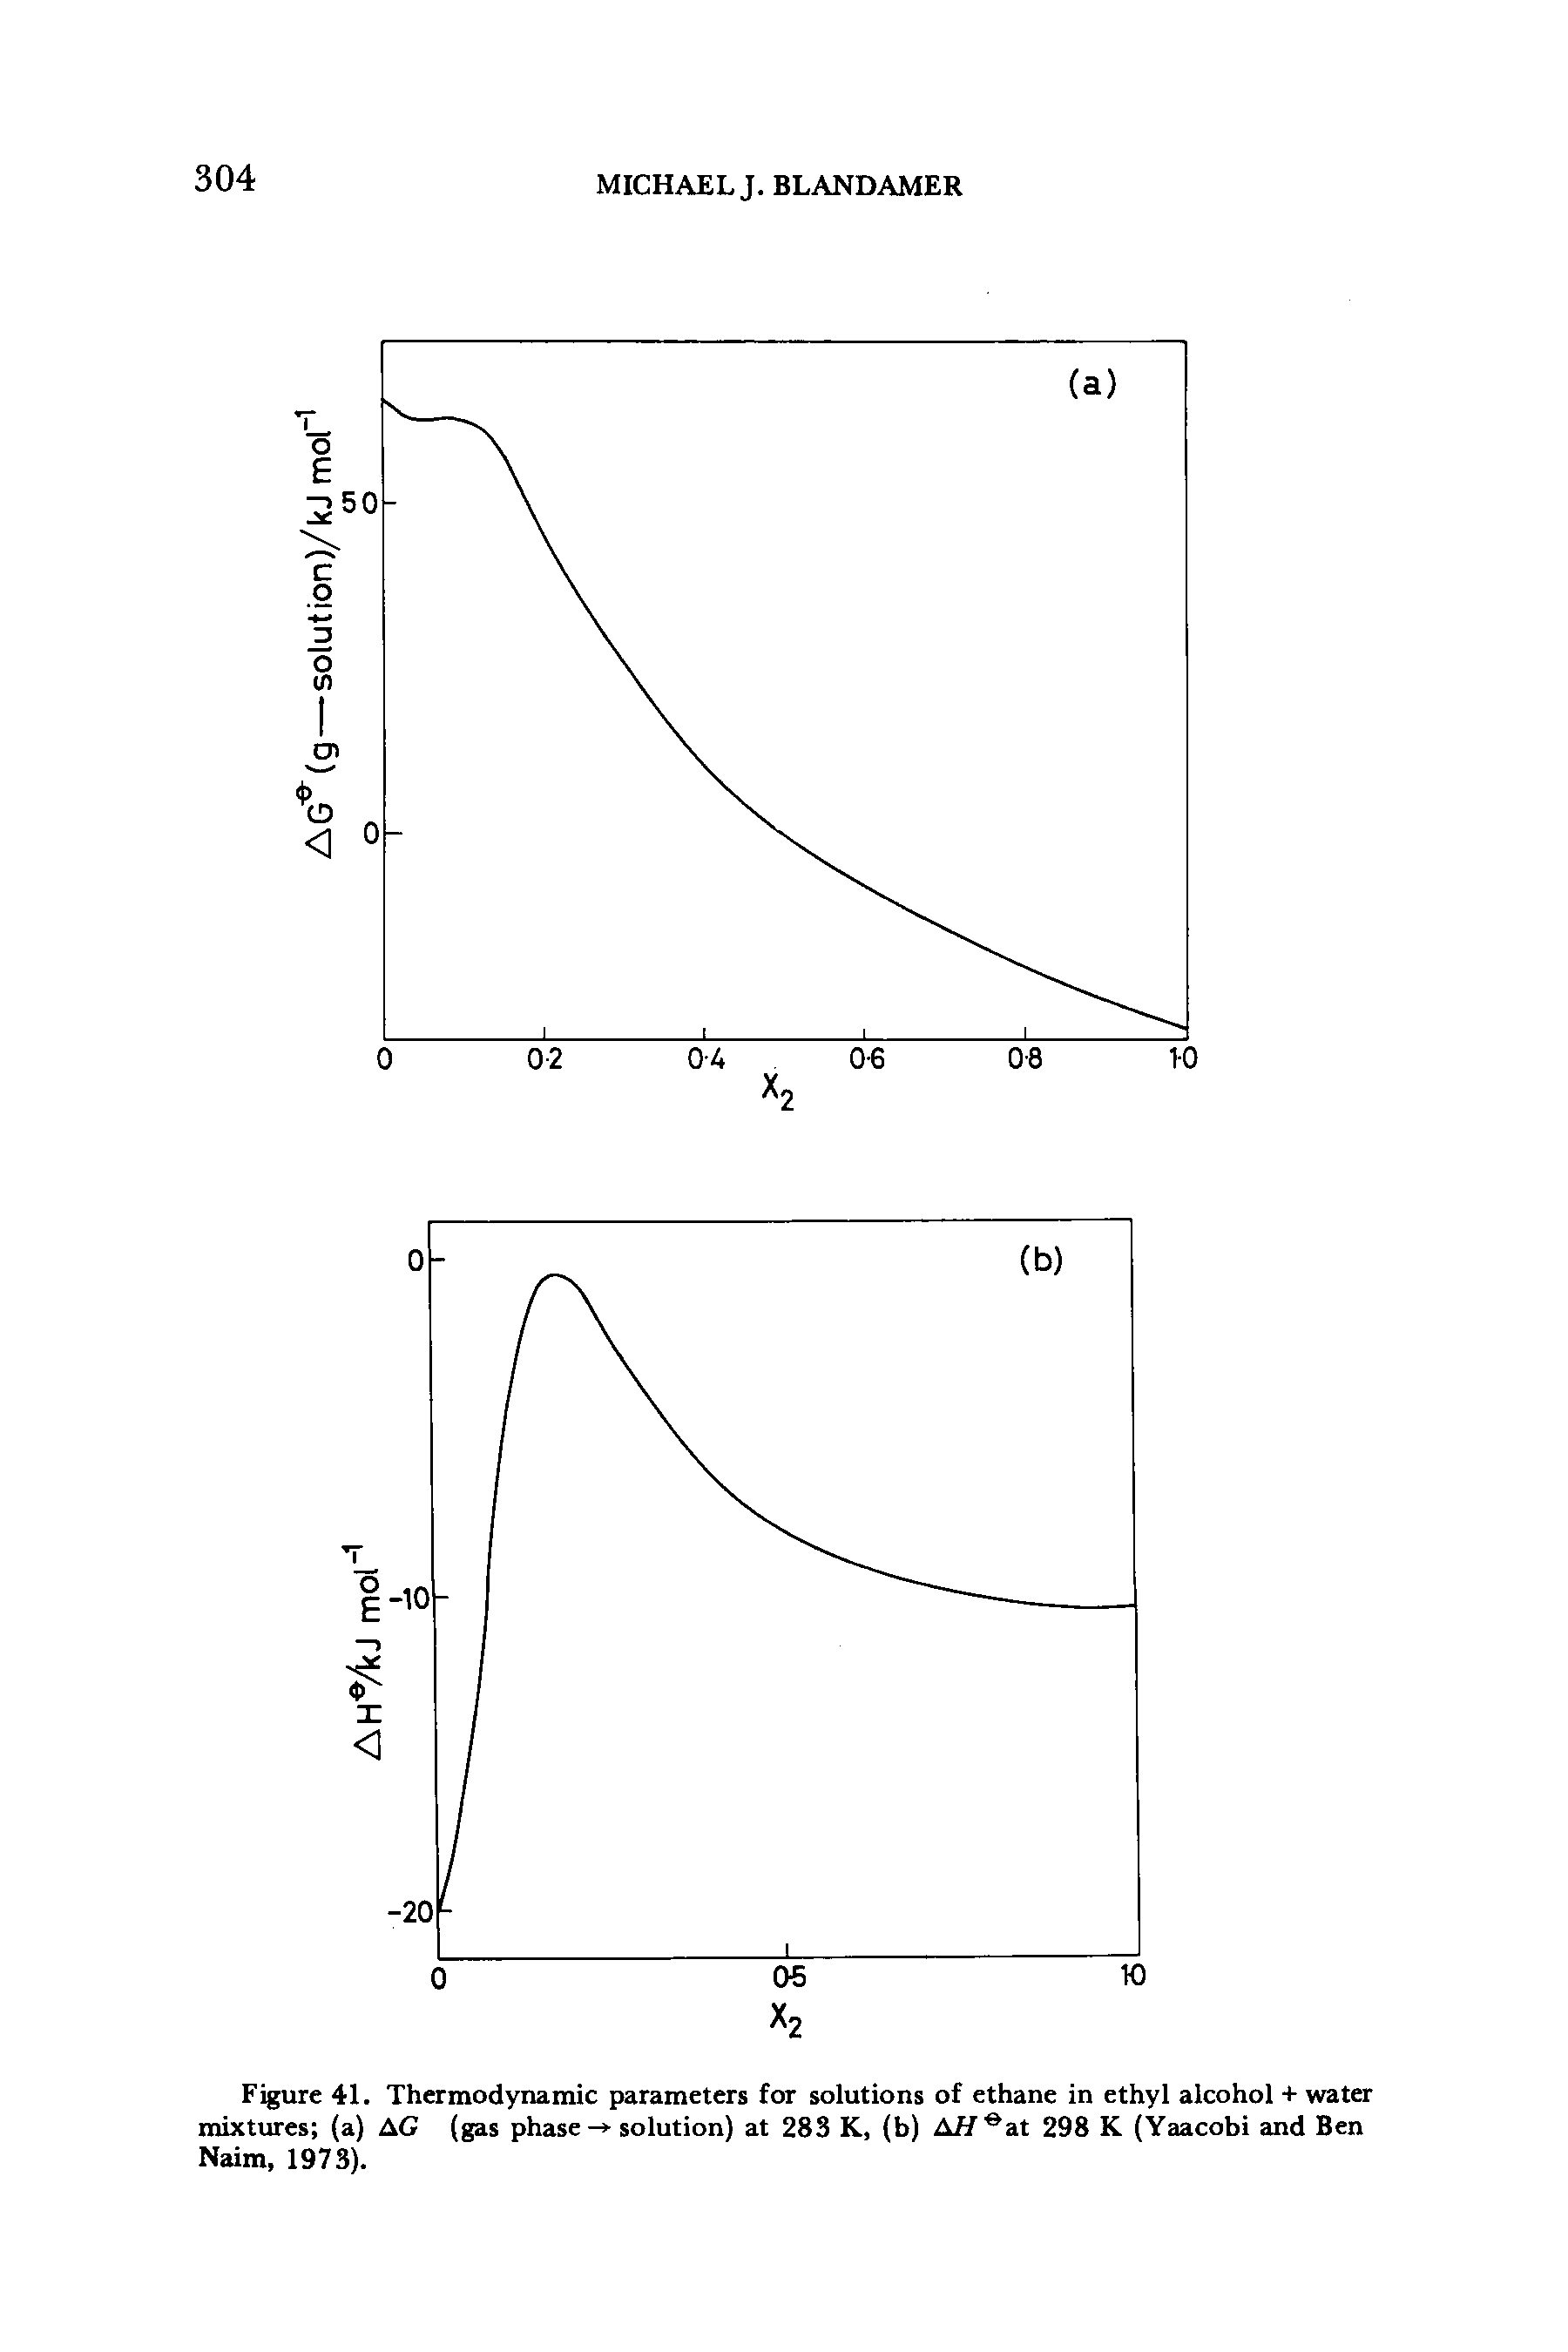 Figure 41. Thermodynamic parameters for solutions of ethane in ethyl alcohol + water mixtures (a) AG (gas phase - solution) at 283 K, (b) A// eat 298 K (Yaacobi and Ben Naim, 1973).